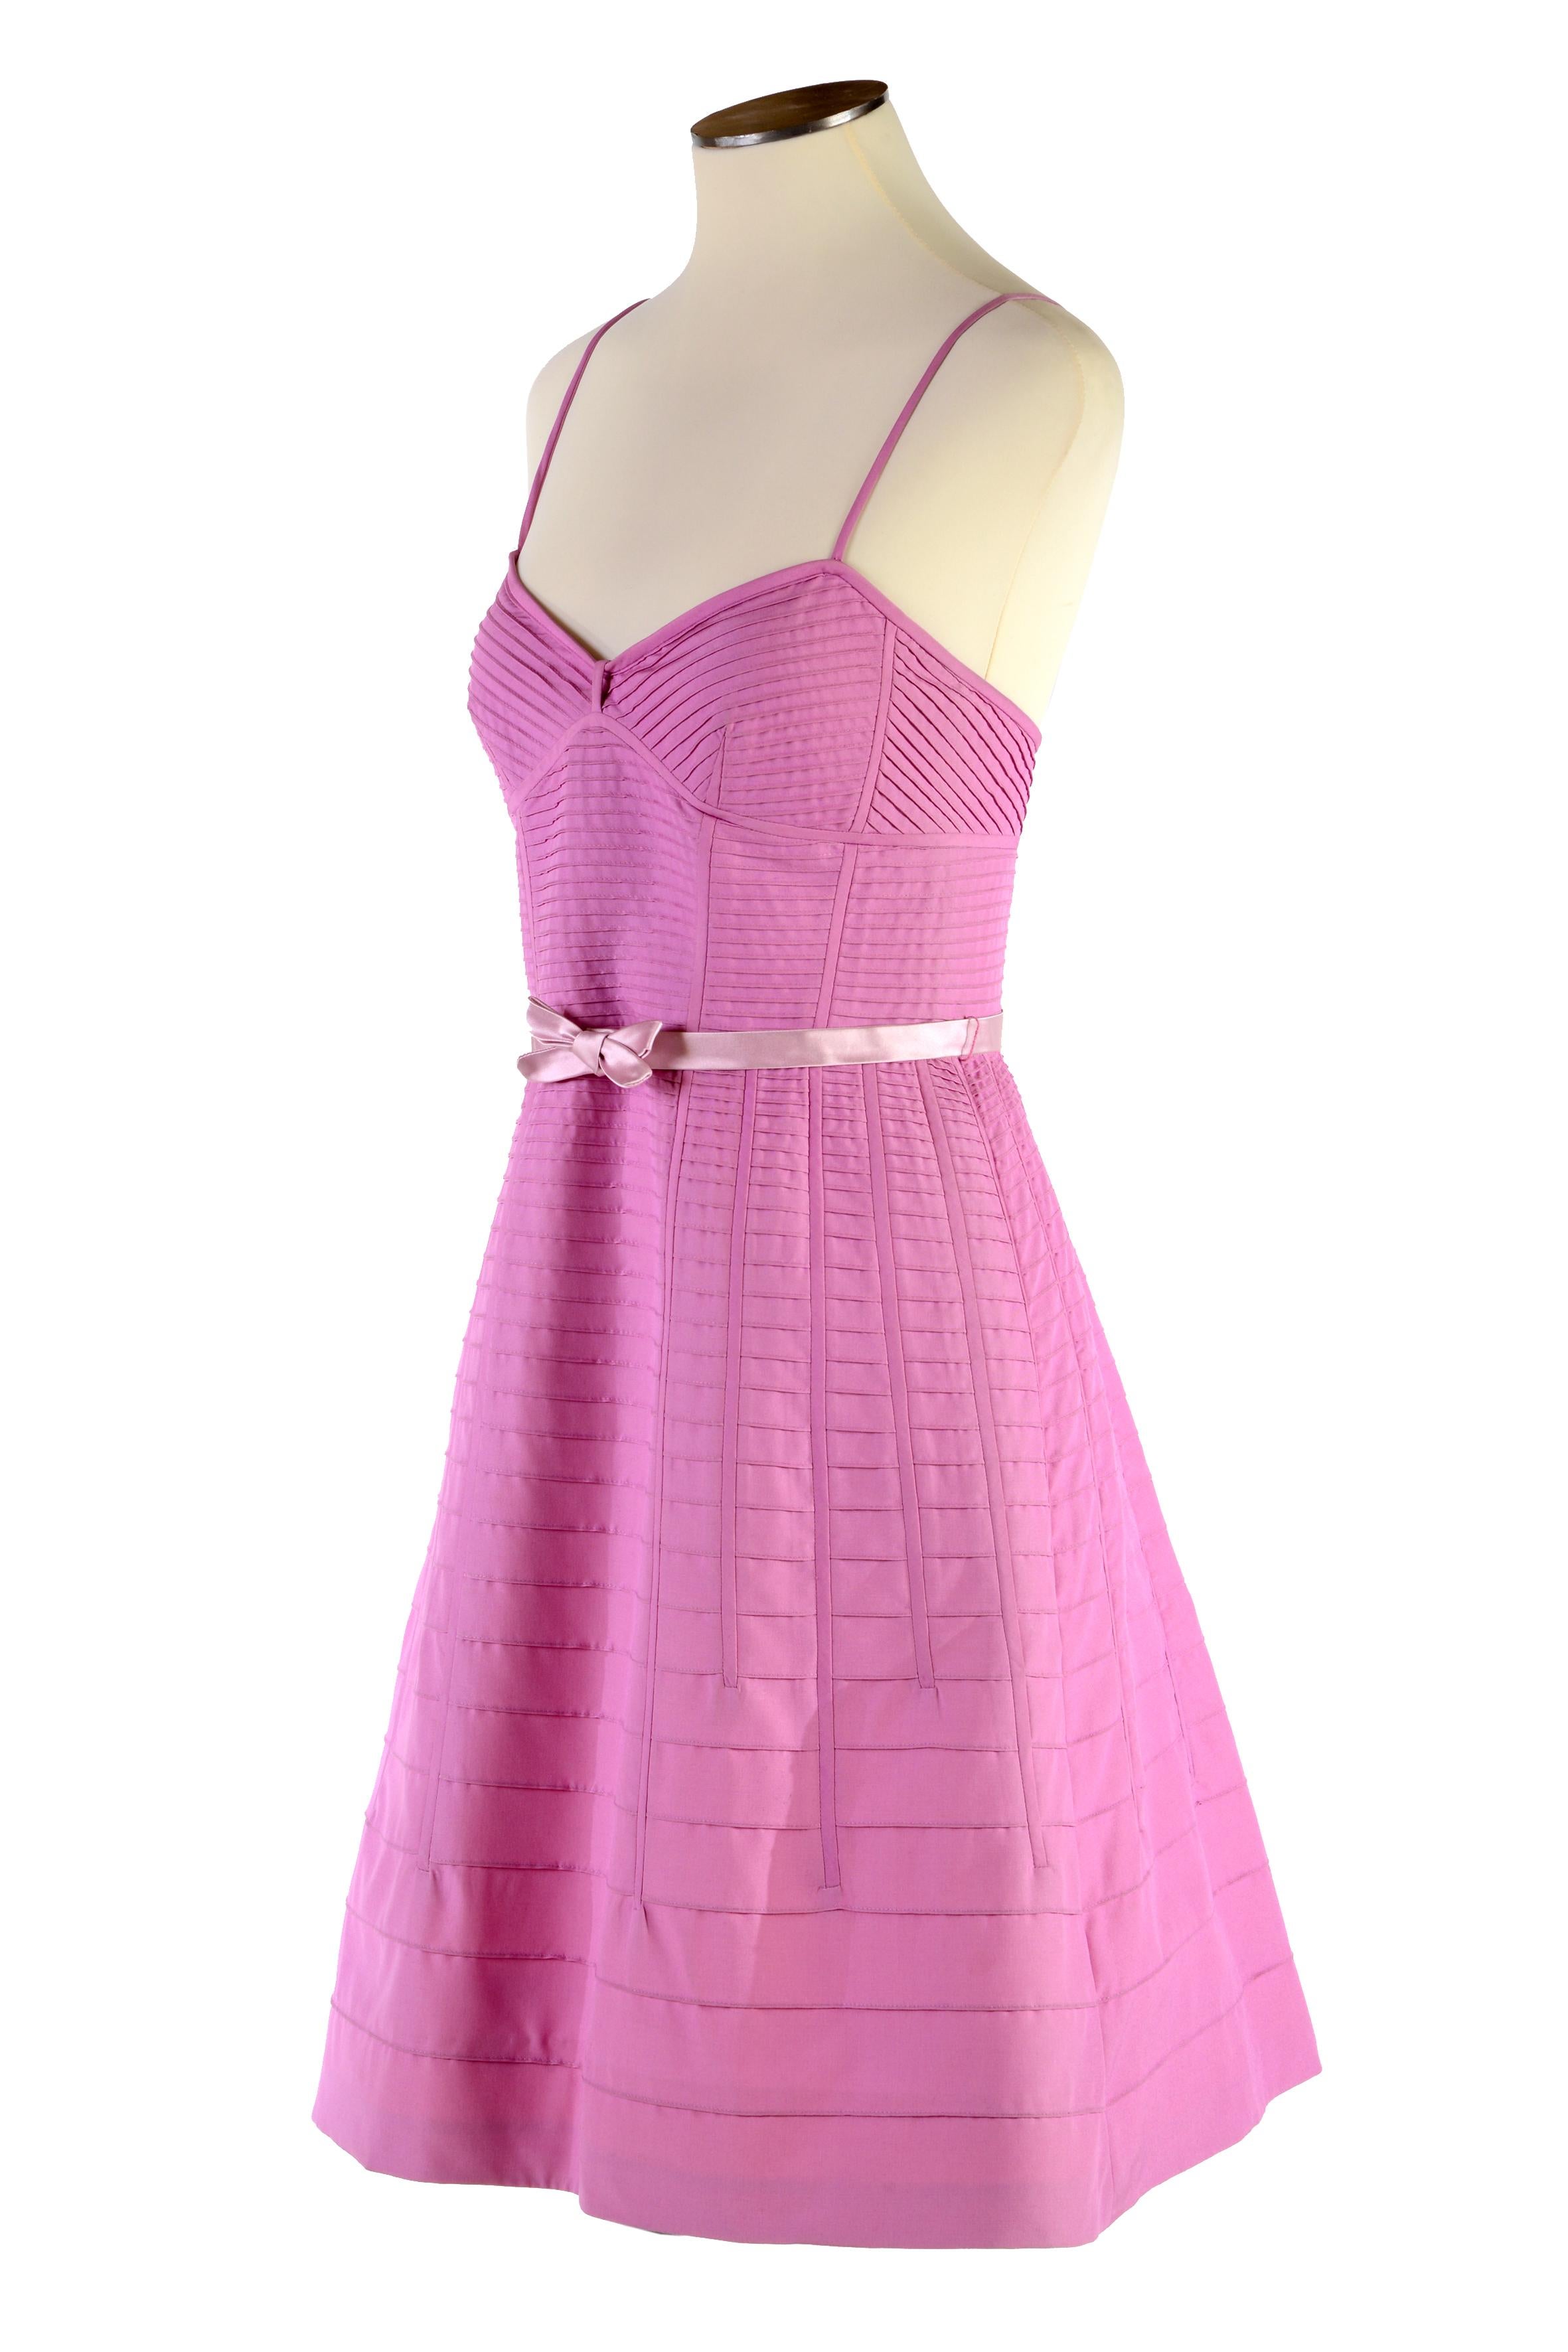 Mark Jacobs pink cyclamen dress US 6
Spaghetti strap and and satin thin belt 
Size US 6
Made in USA
51% silk
49% wool
Lined
flat measures:
Length cm. 97
Bust cm. 40
Waistline cm. 37
Excellent condition